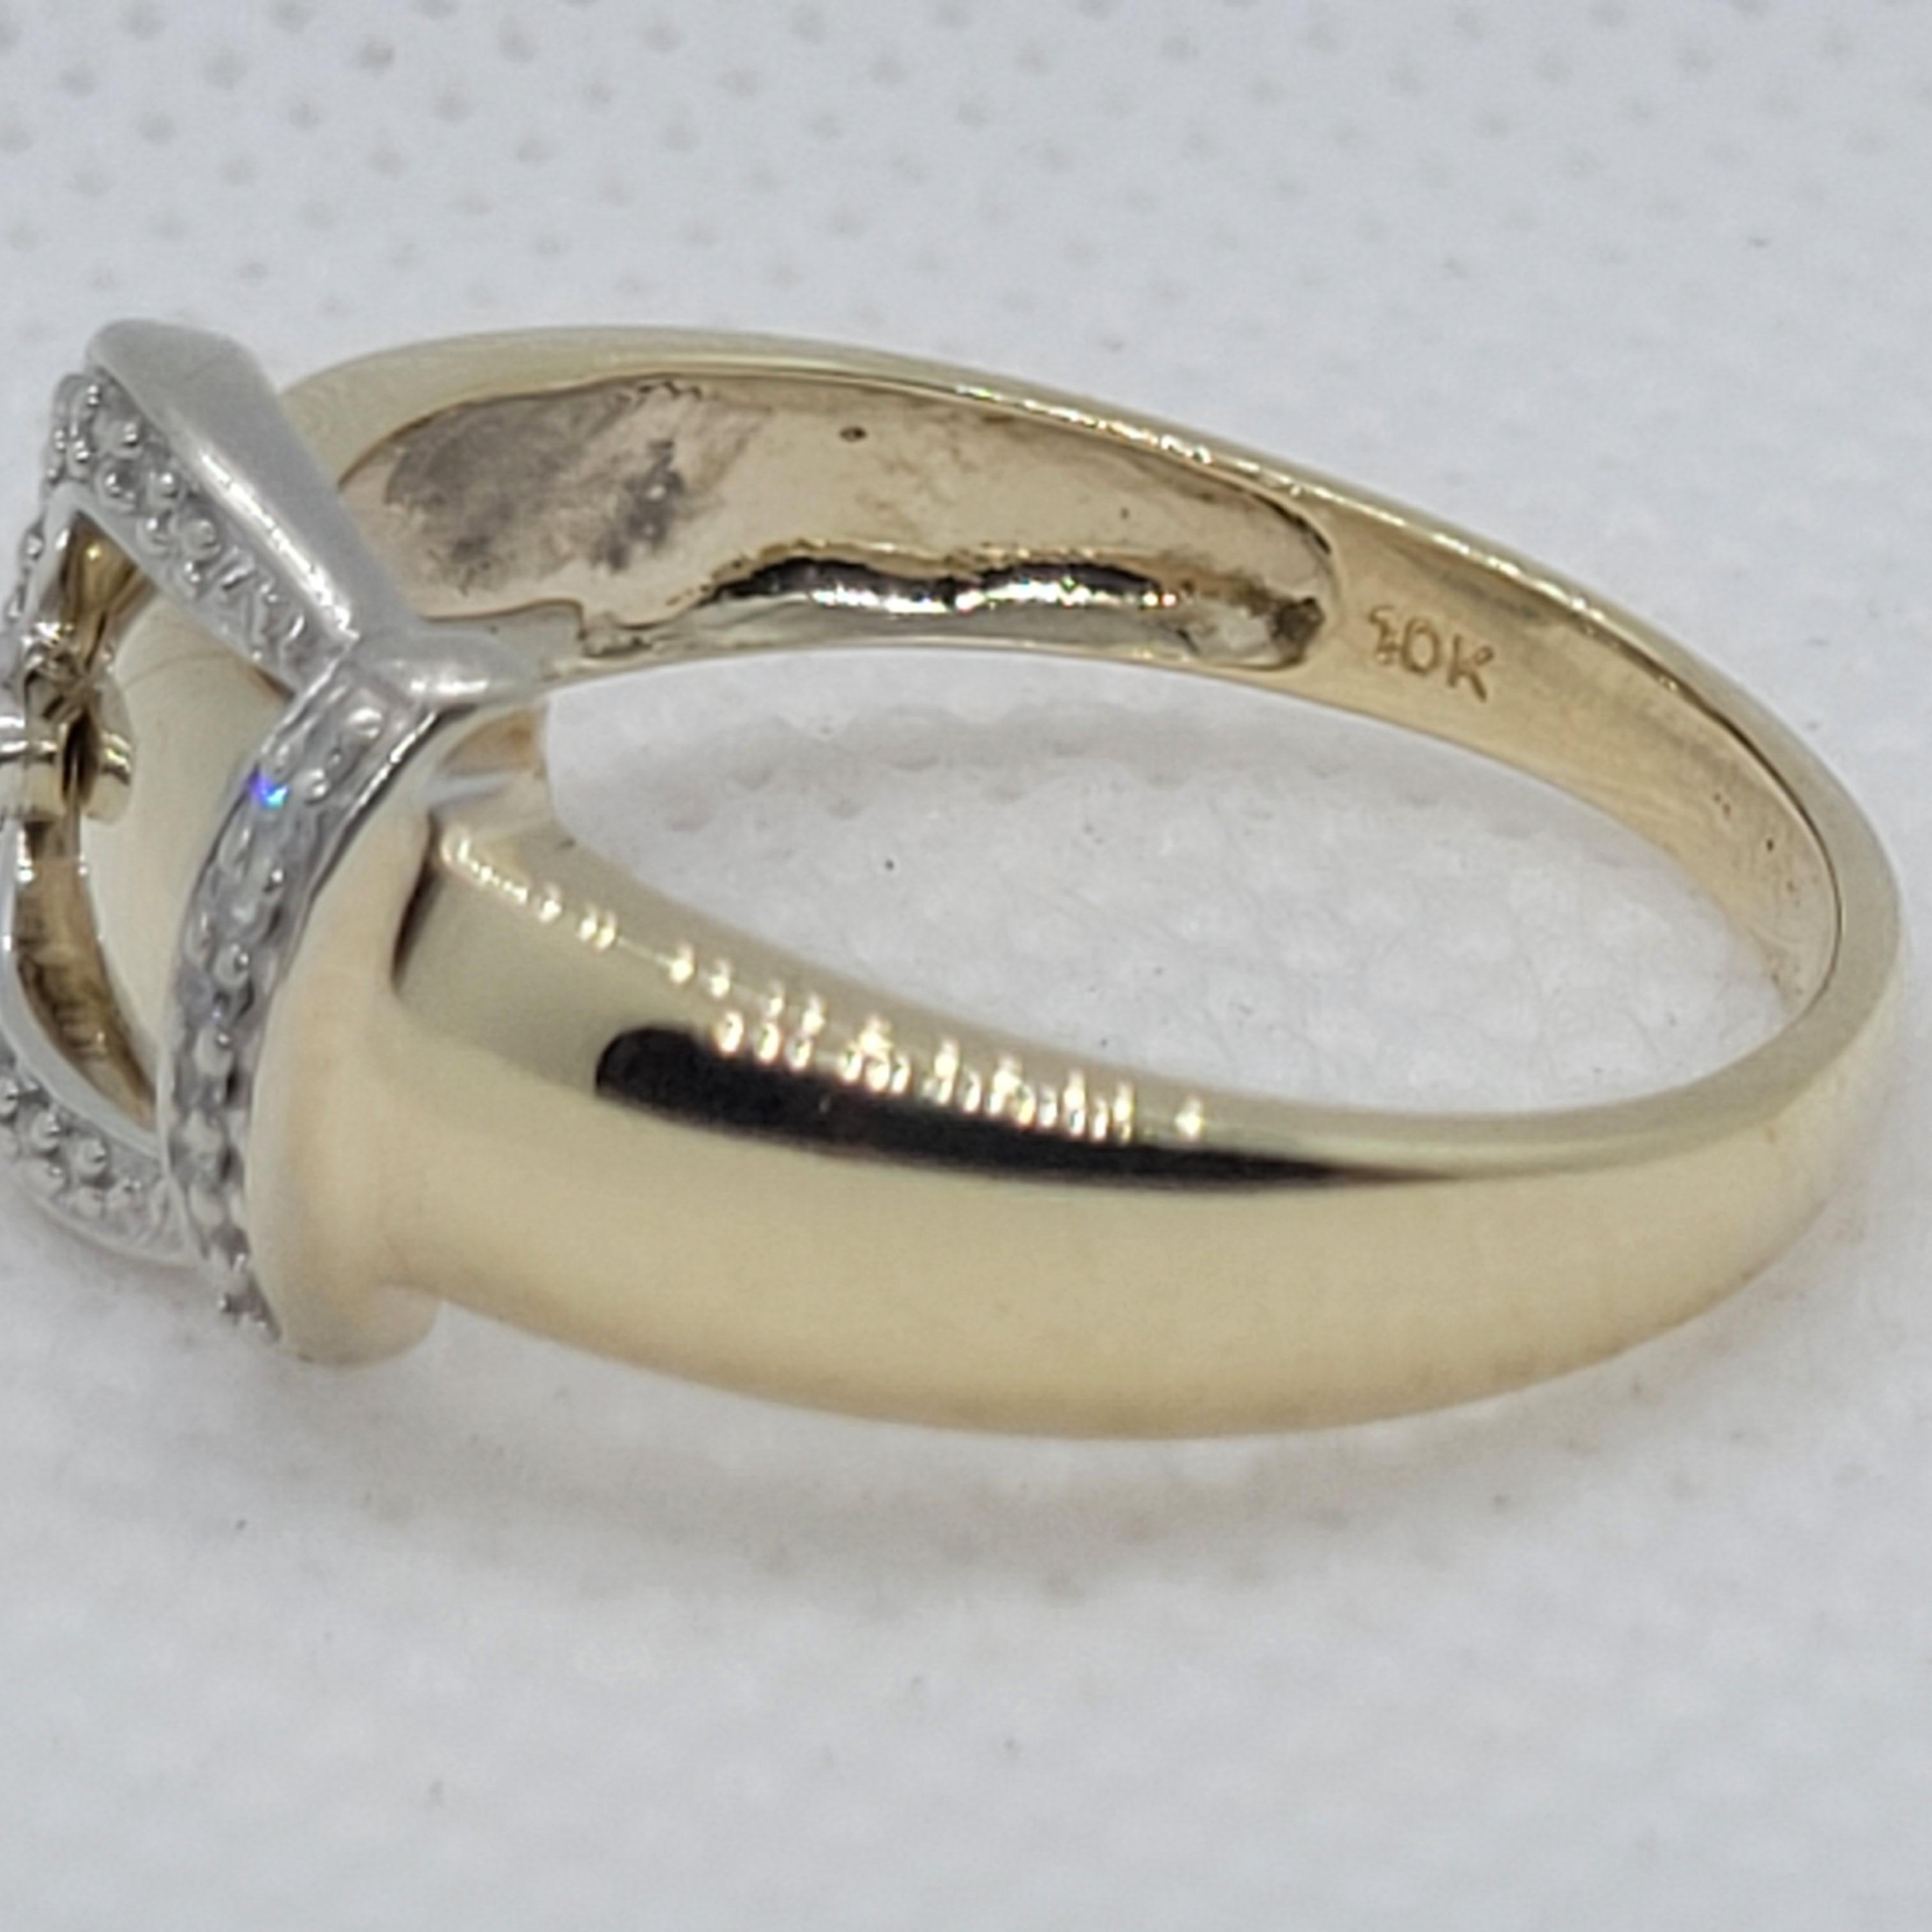 10kt Two-Tone Buckle Design Diamond Ring, 25 Diamonds, Appx .25cttw In Good Condition For Sale In Rancho Santa Fe, CA